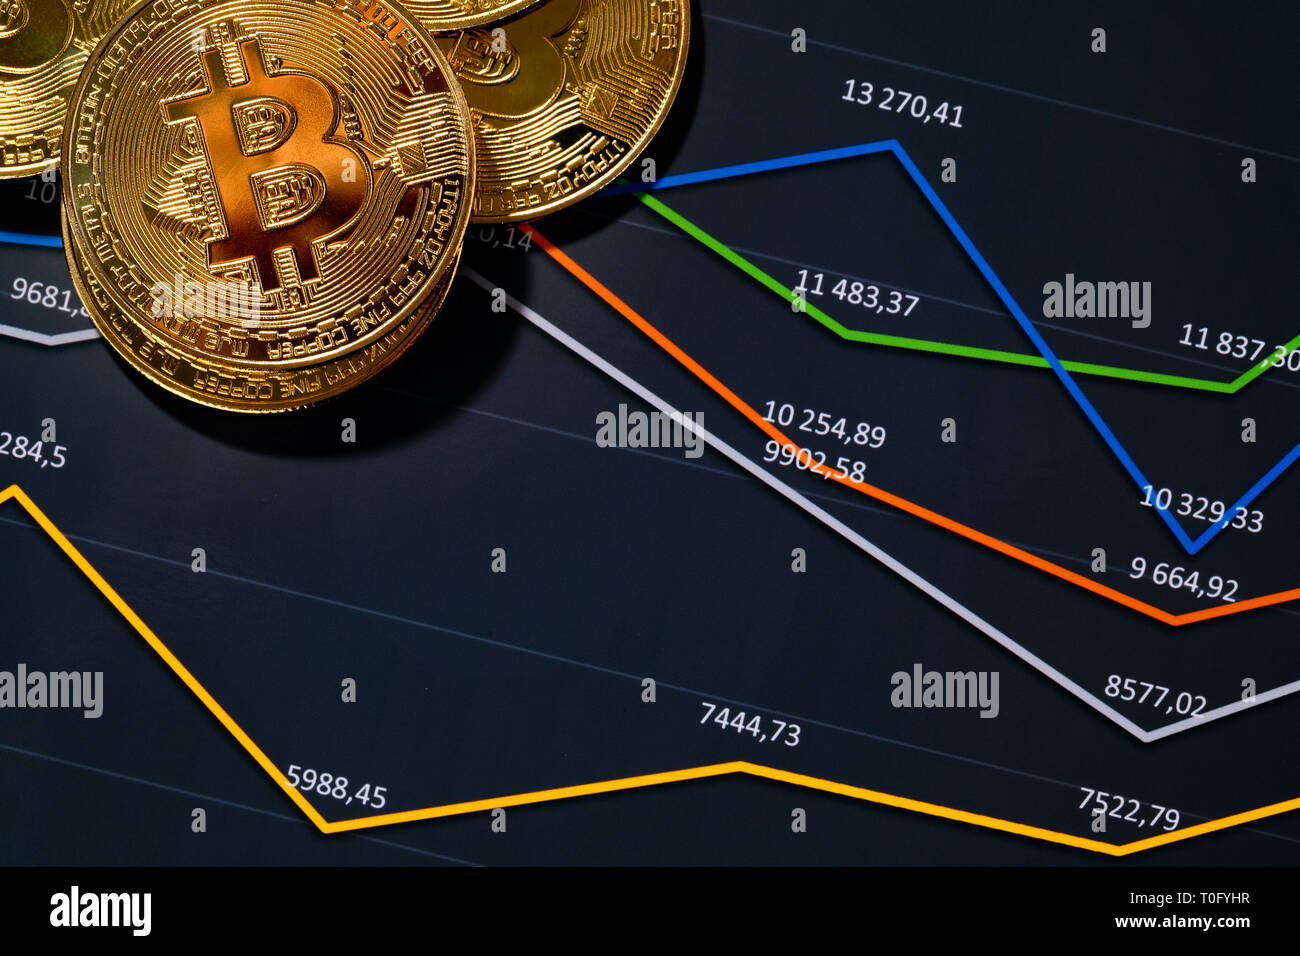 Gold bitcoin on financial charts for cryptocurrency values Stock Photo